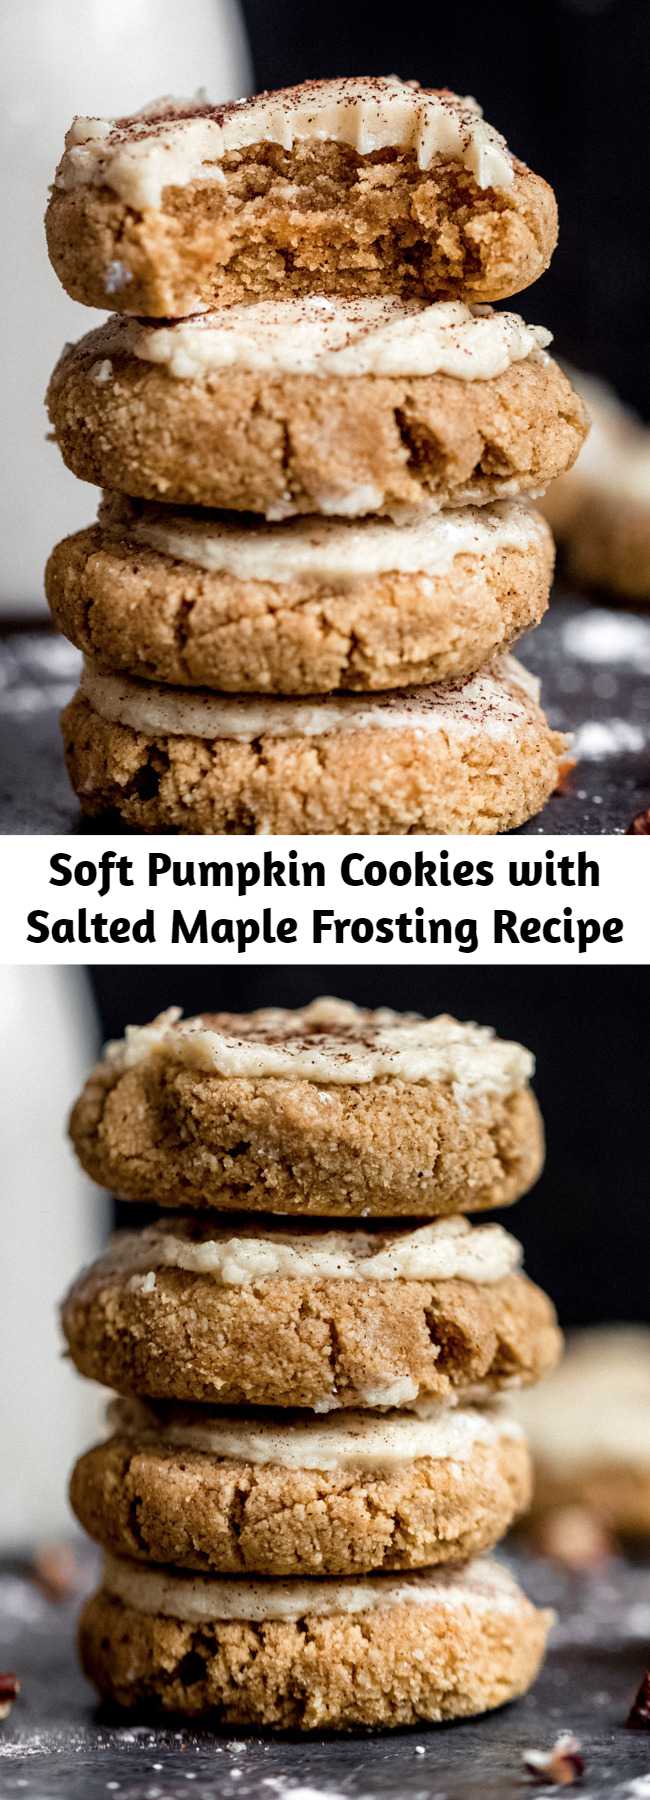 Soft Pumpkin Cookies with Salted Maple Frosting Recipe - These healthy soft pumpkin cookies with an addicting salted maple frosting are absolutely delicious! These melt-in-your-mouth cookies are both gluten free and grain free and taste like a slice of your favorite pumpkin pie! #cookies #pumpkin #pumpkinrecipe #healthydessert #glutenfree #baking #grainfree